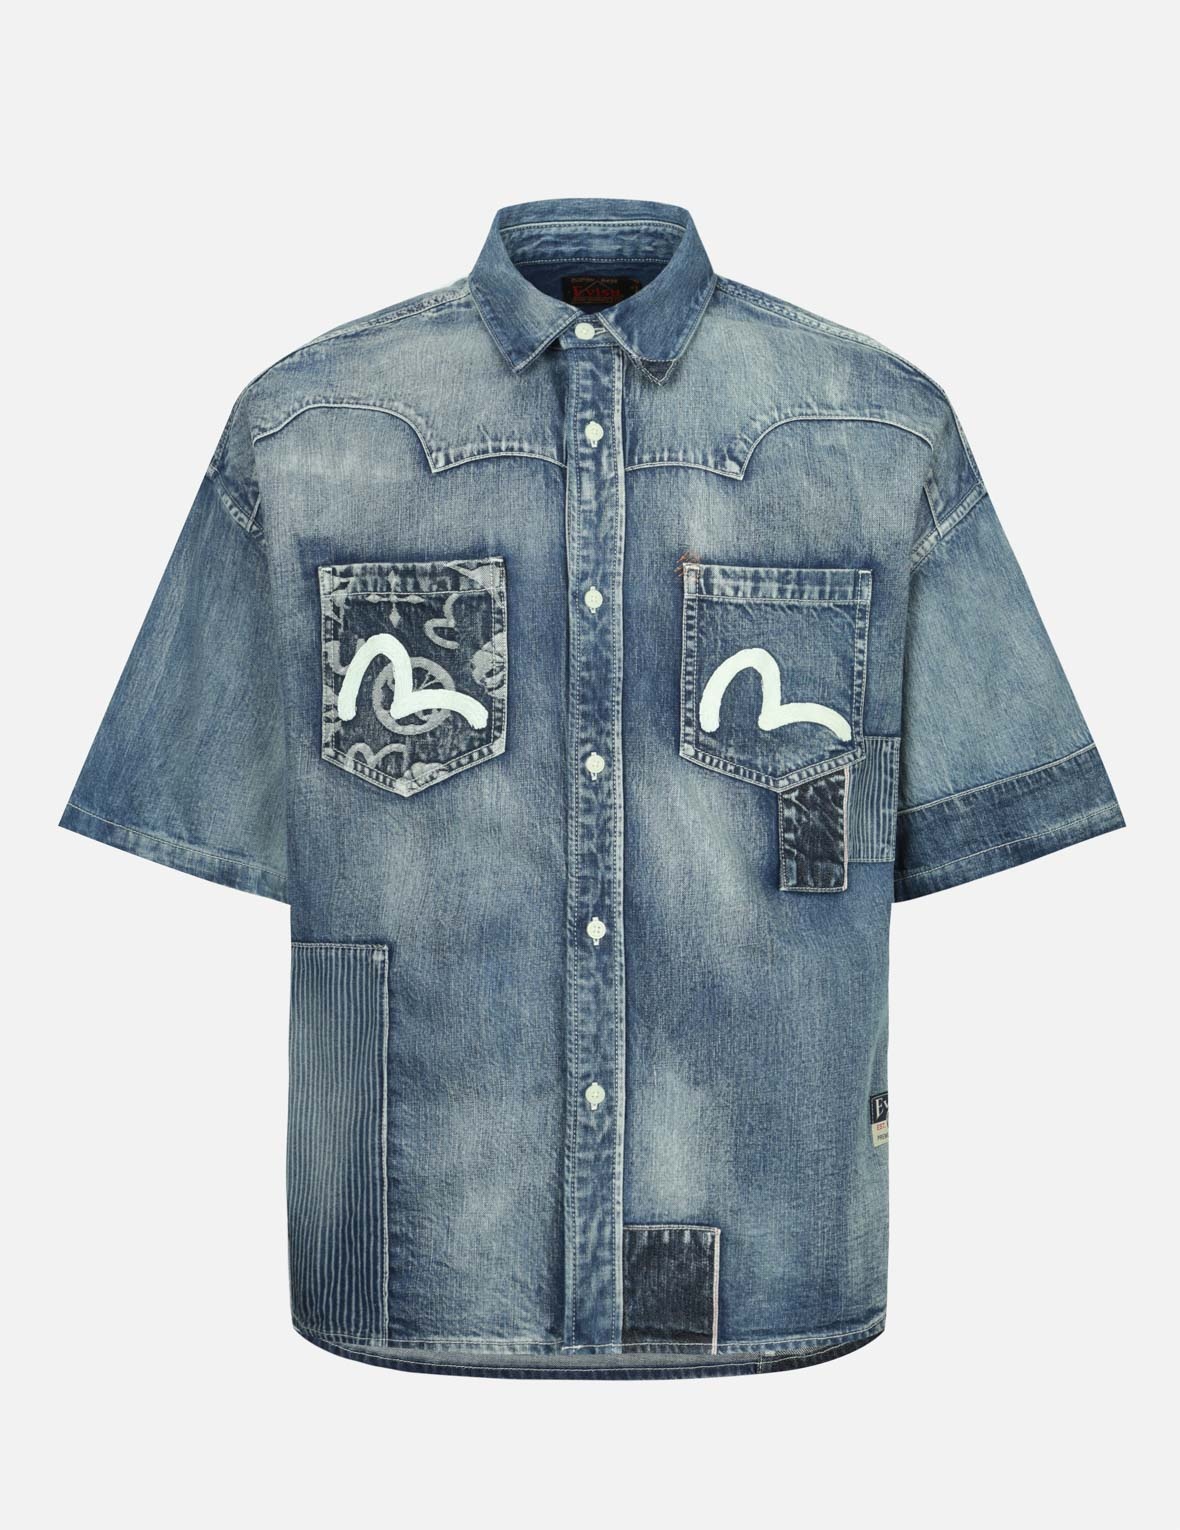 SEAGULL PRINT AND MULTI-PATCHES LOOSE FIT DENIM SHIRT - 1